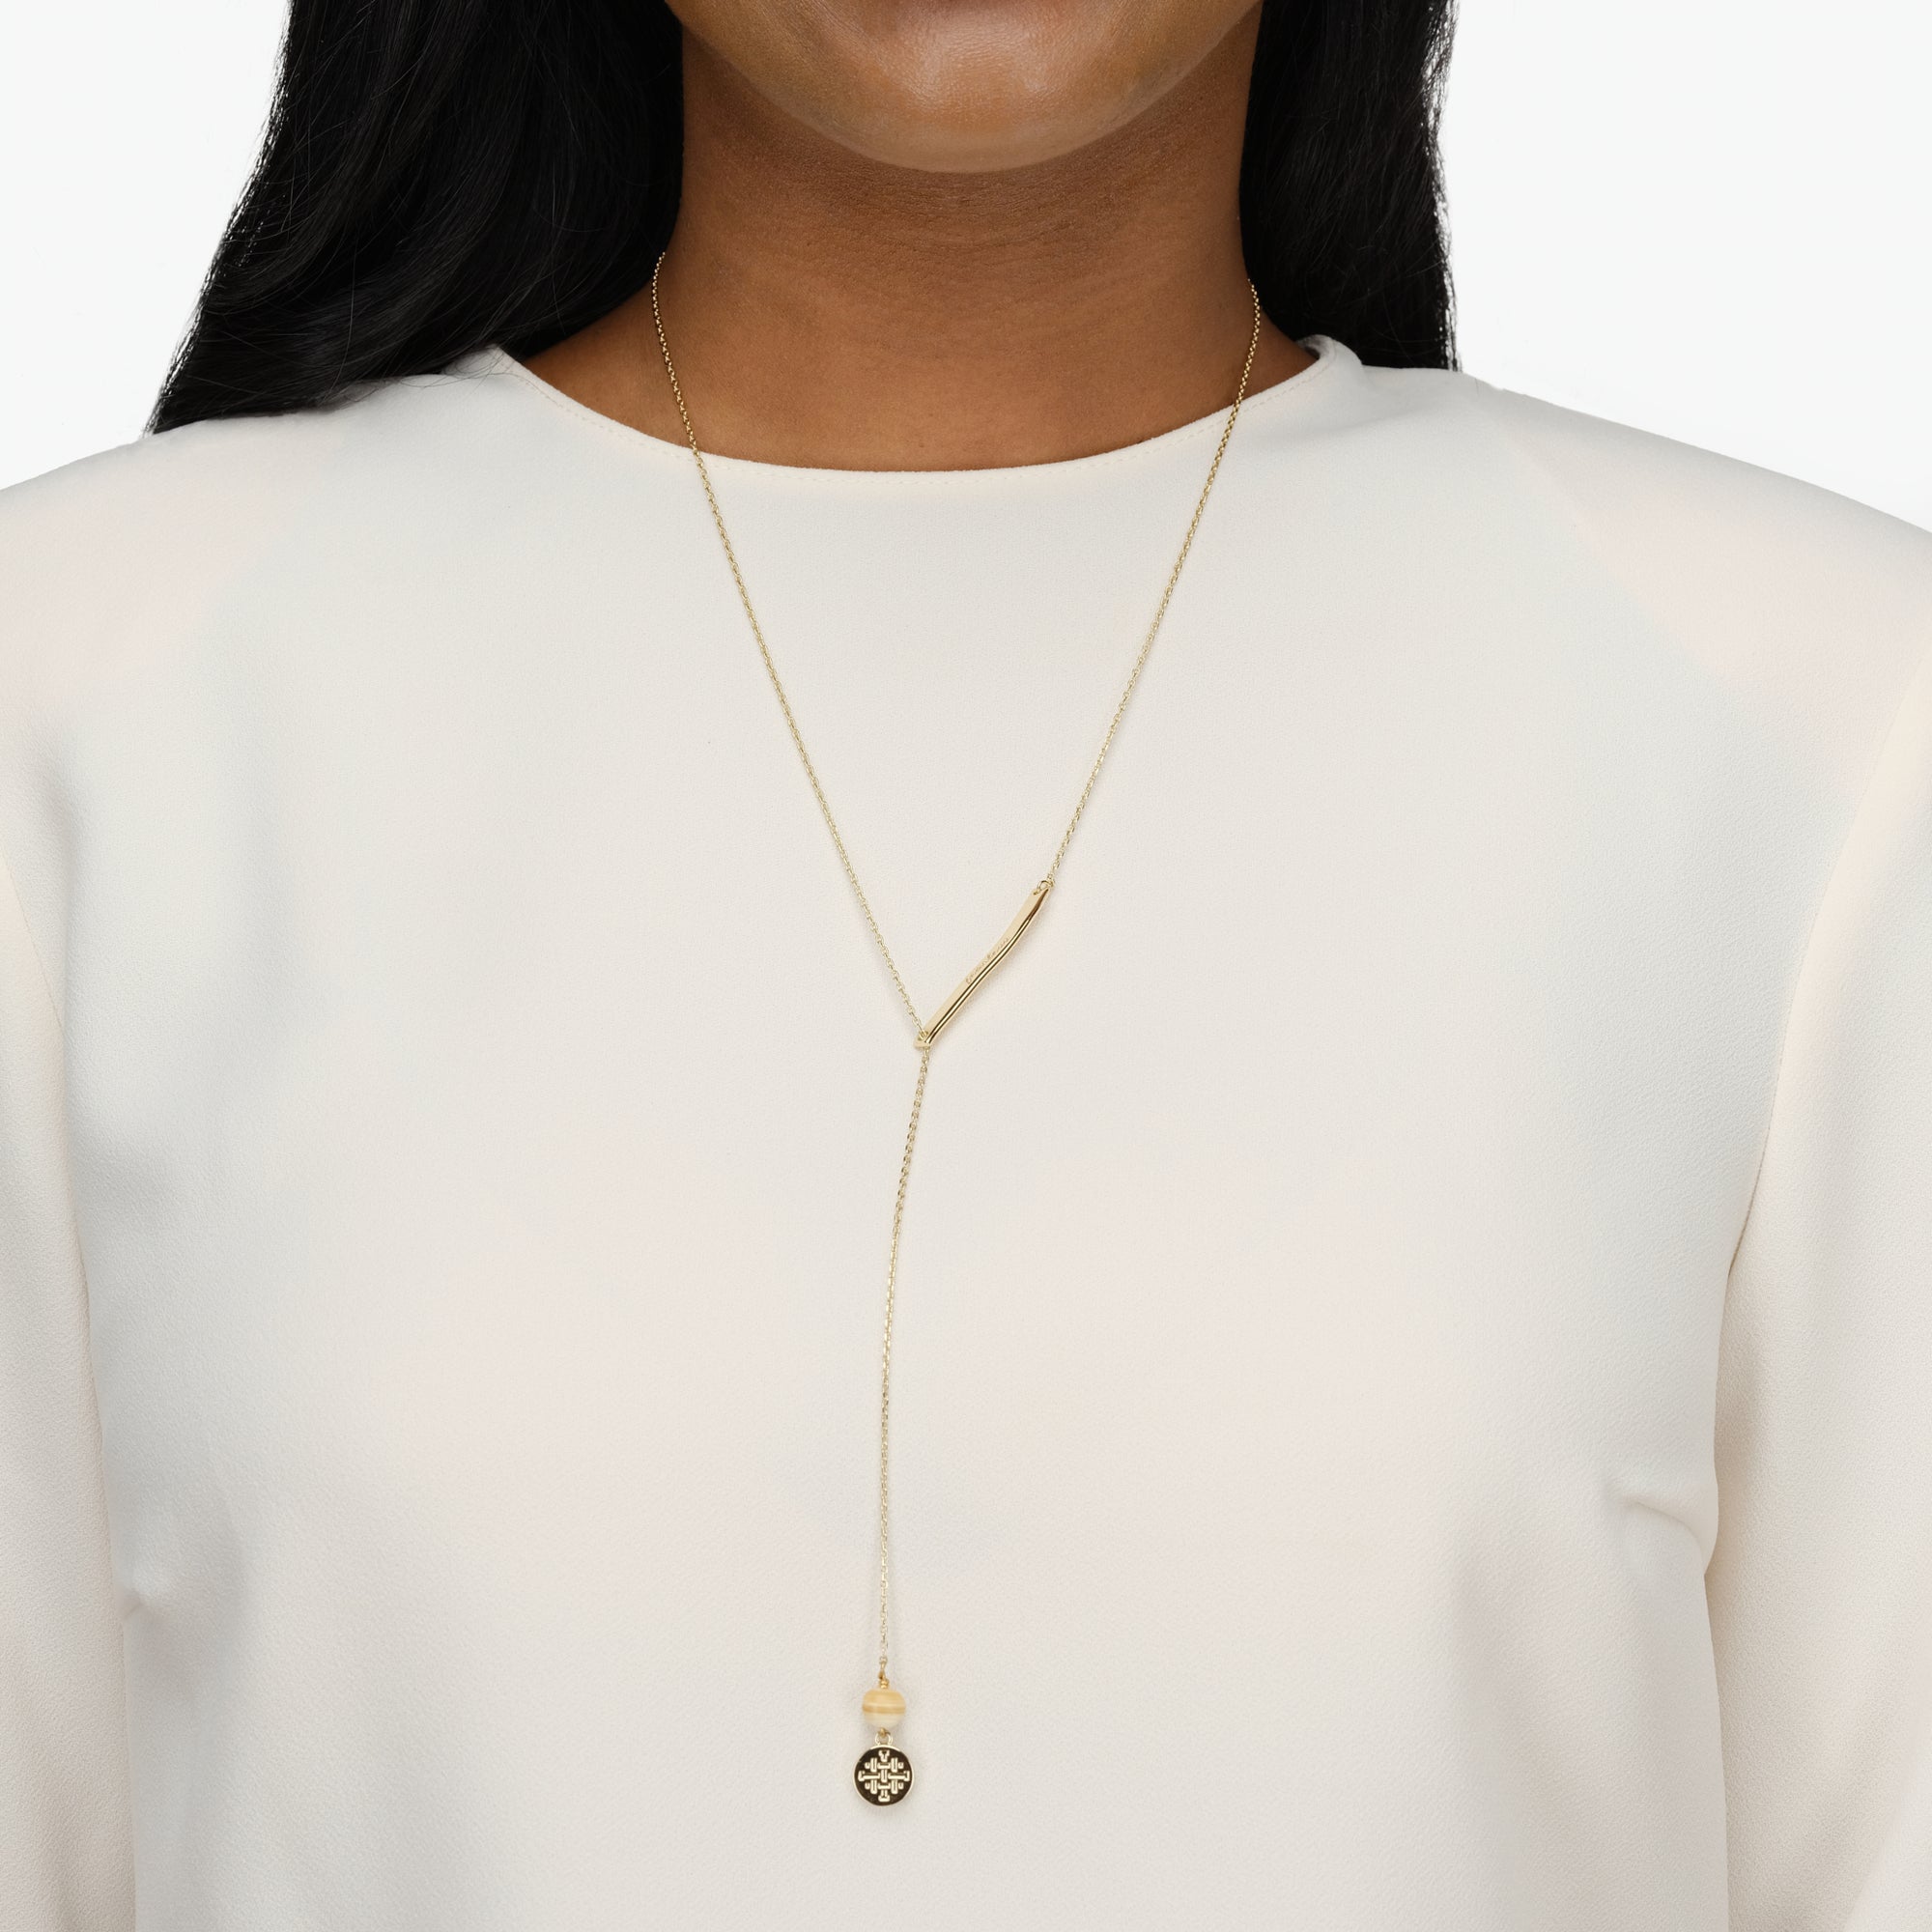 FEARLESS Inspirational Chain Lariat Necklace with Horn